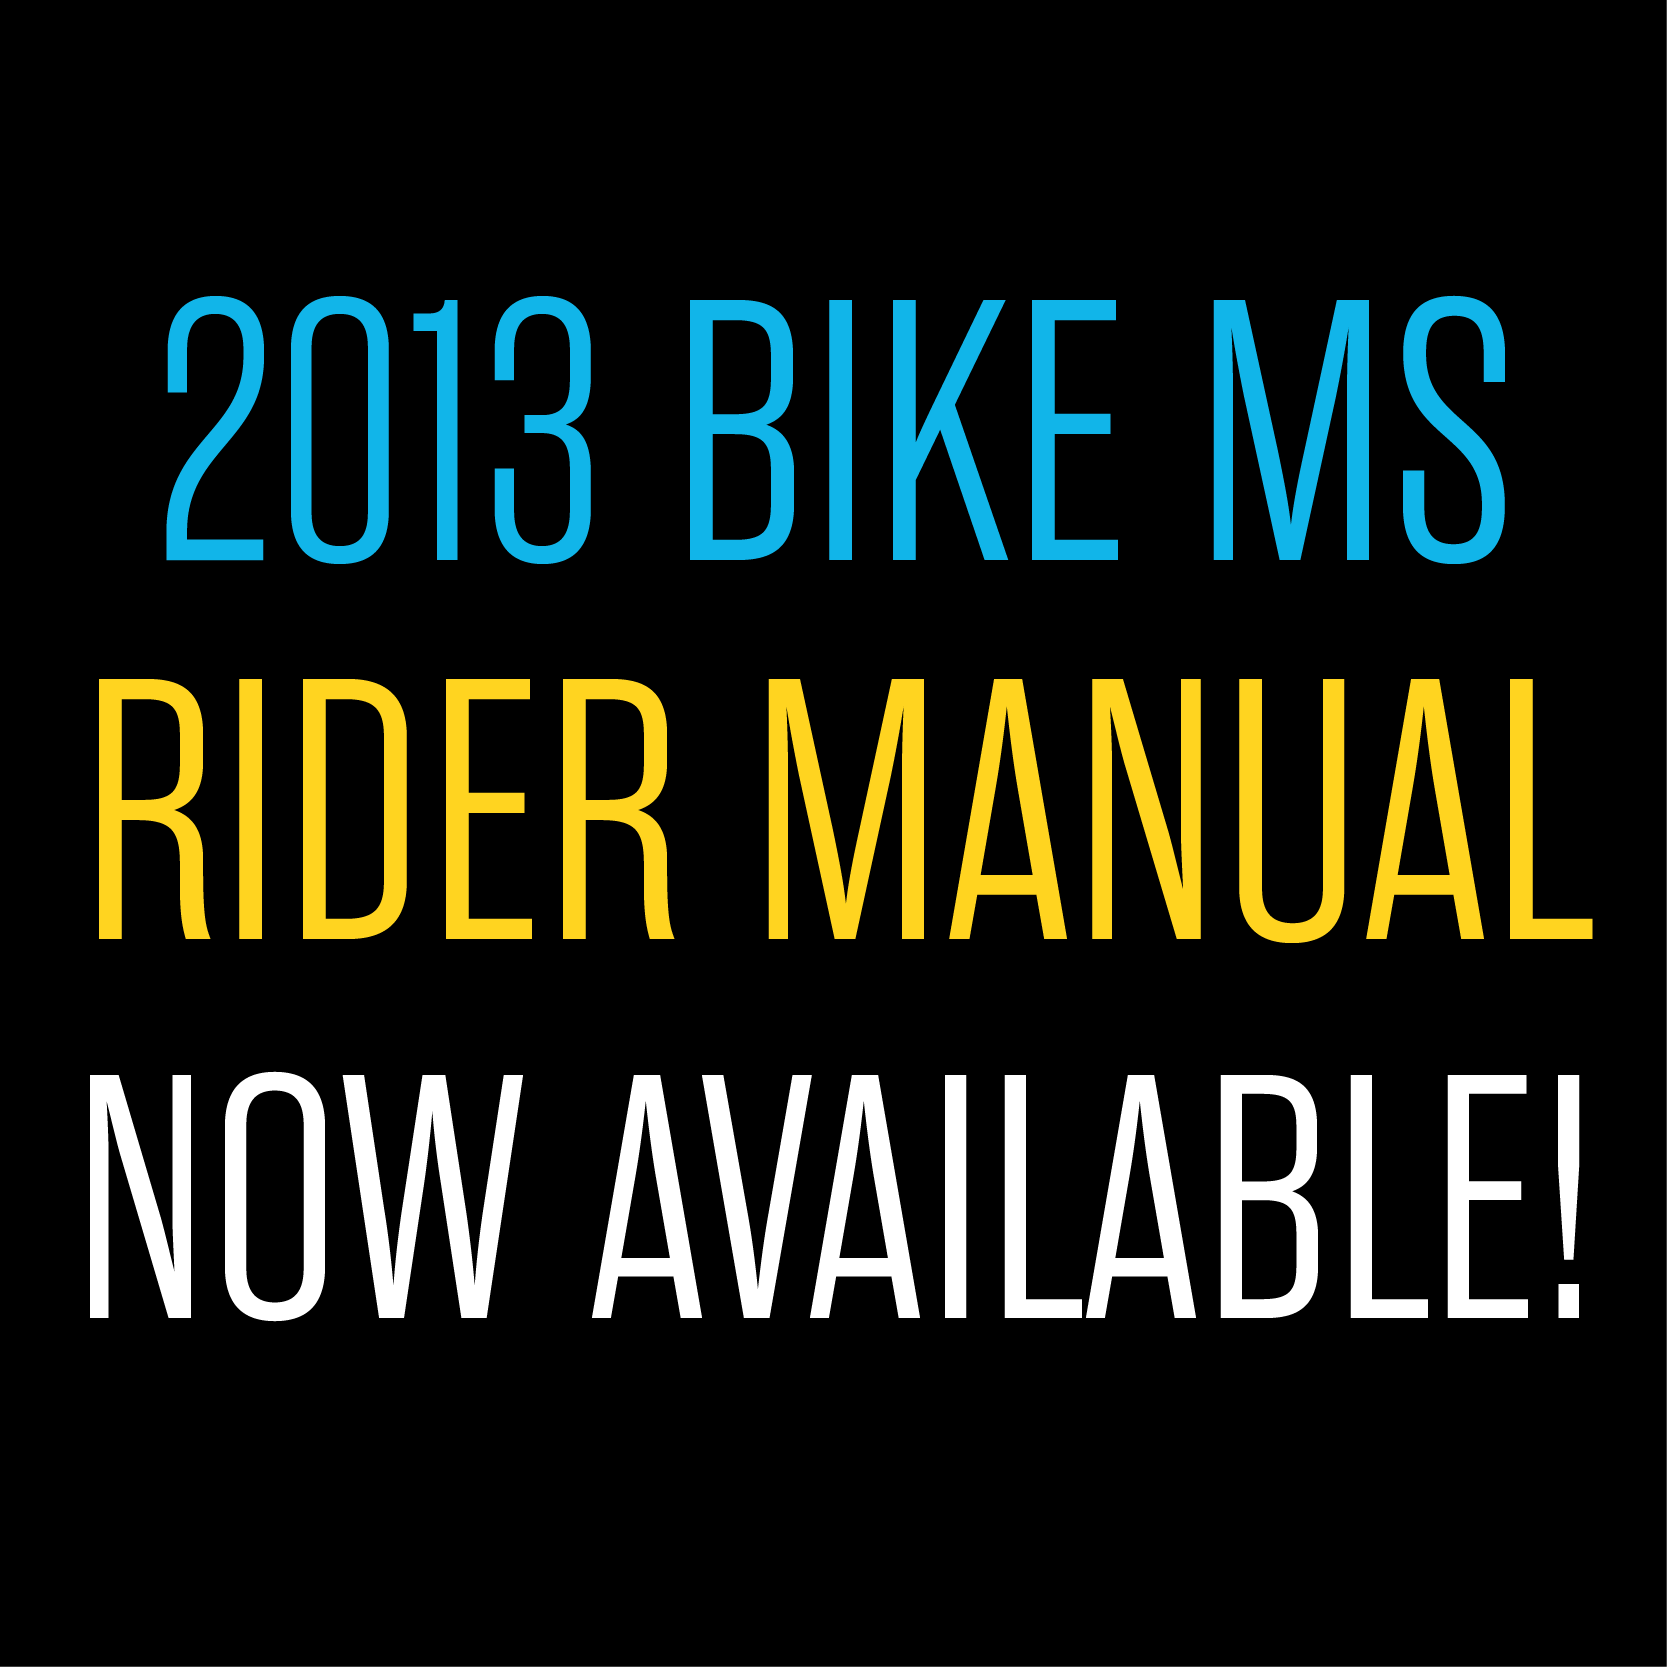 2013 Bike MS Rider Manual Now Available!